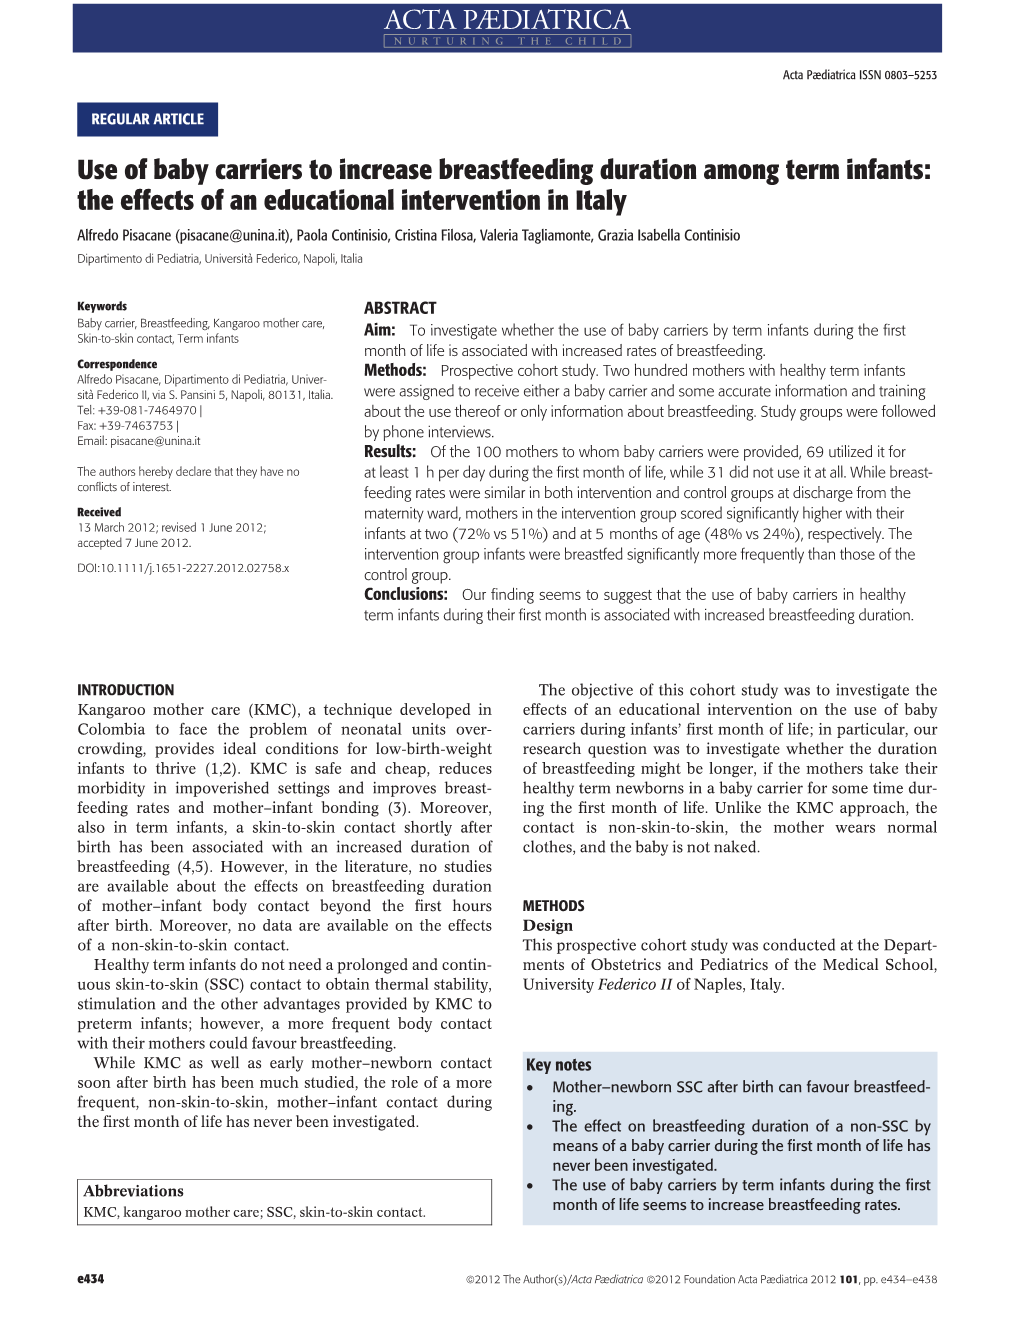 Use of Baby Carriers to Increase Breastfeeding Duration Among Term Infants: the Effects of an Educational Intervention in Italy